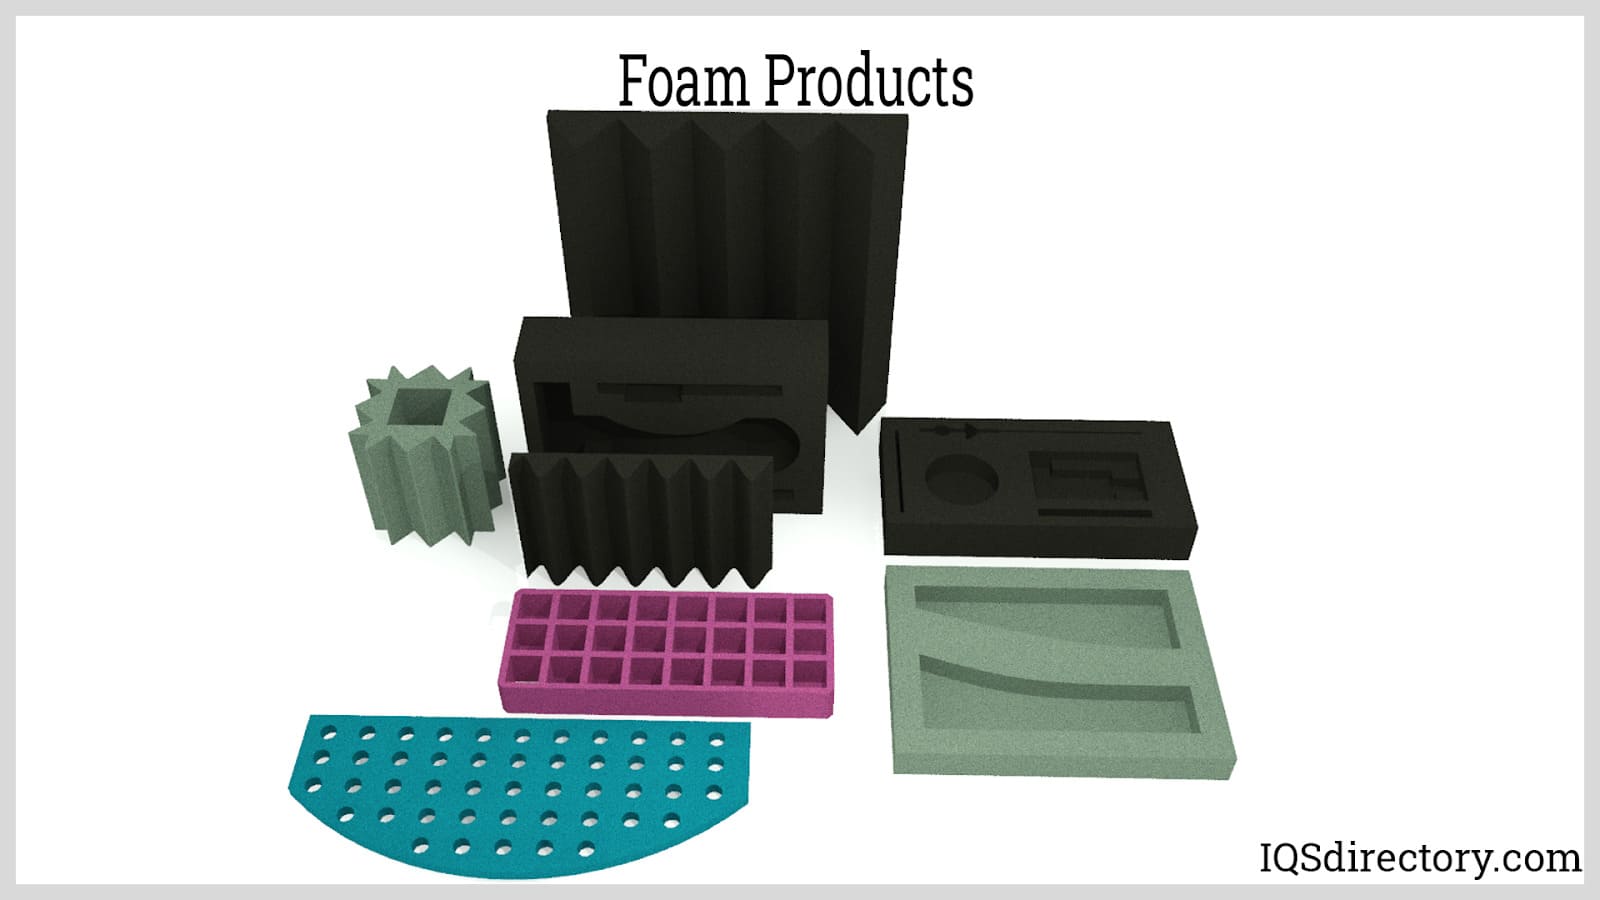 Foam Products